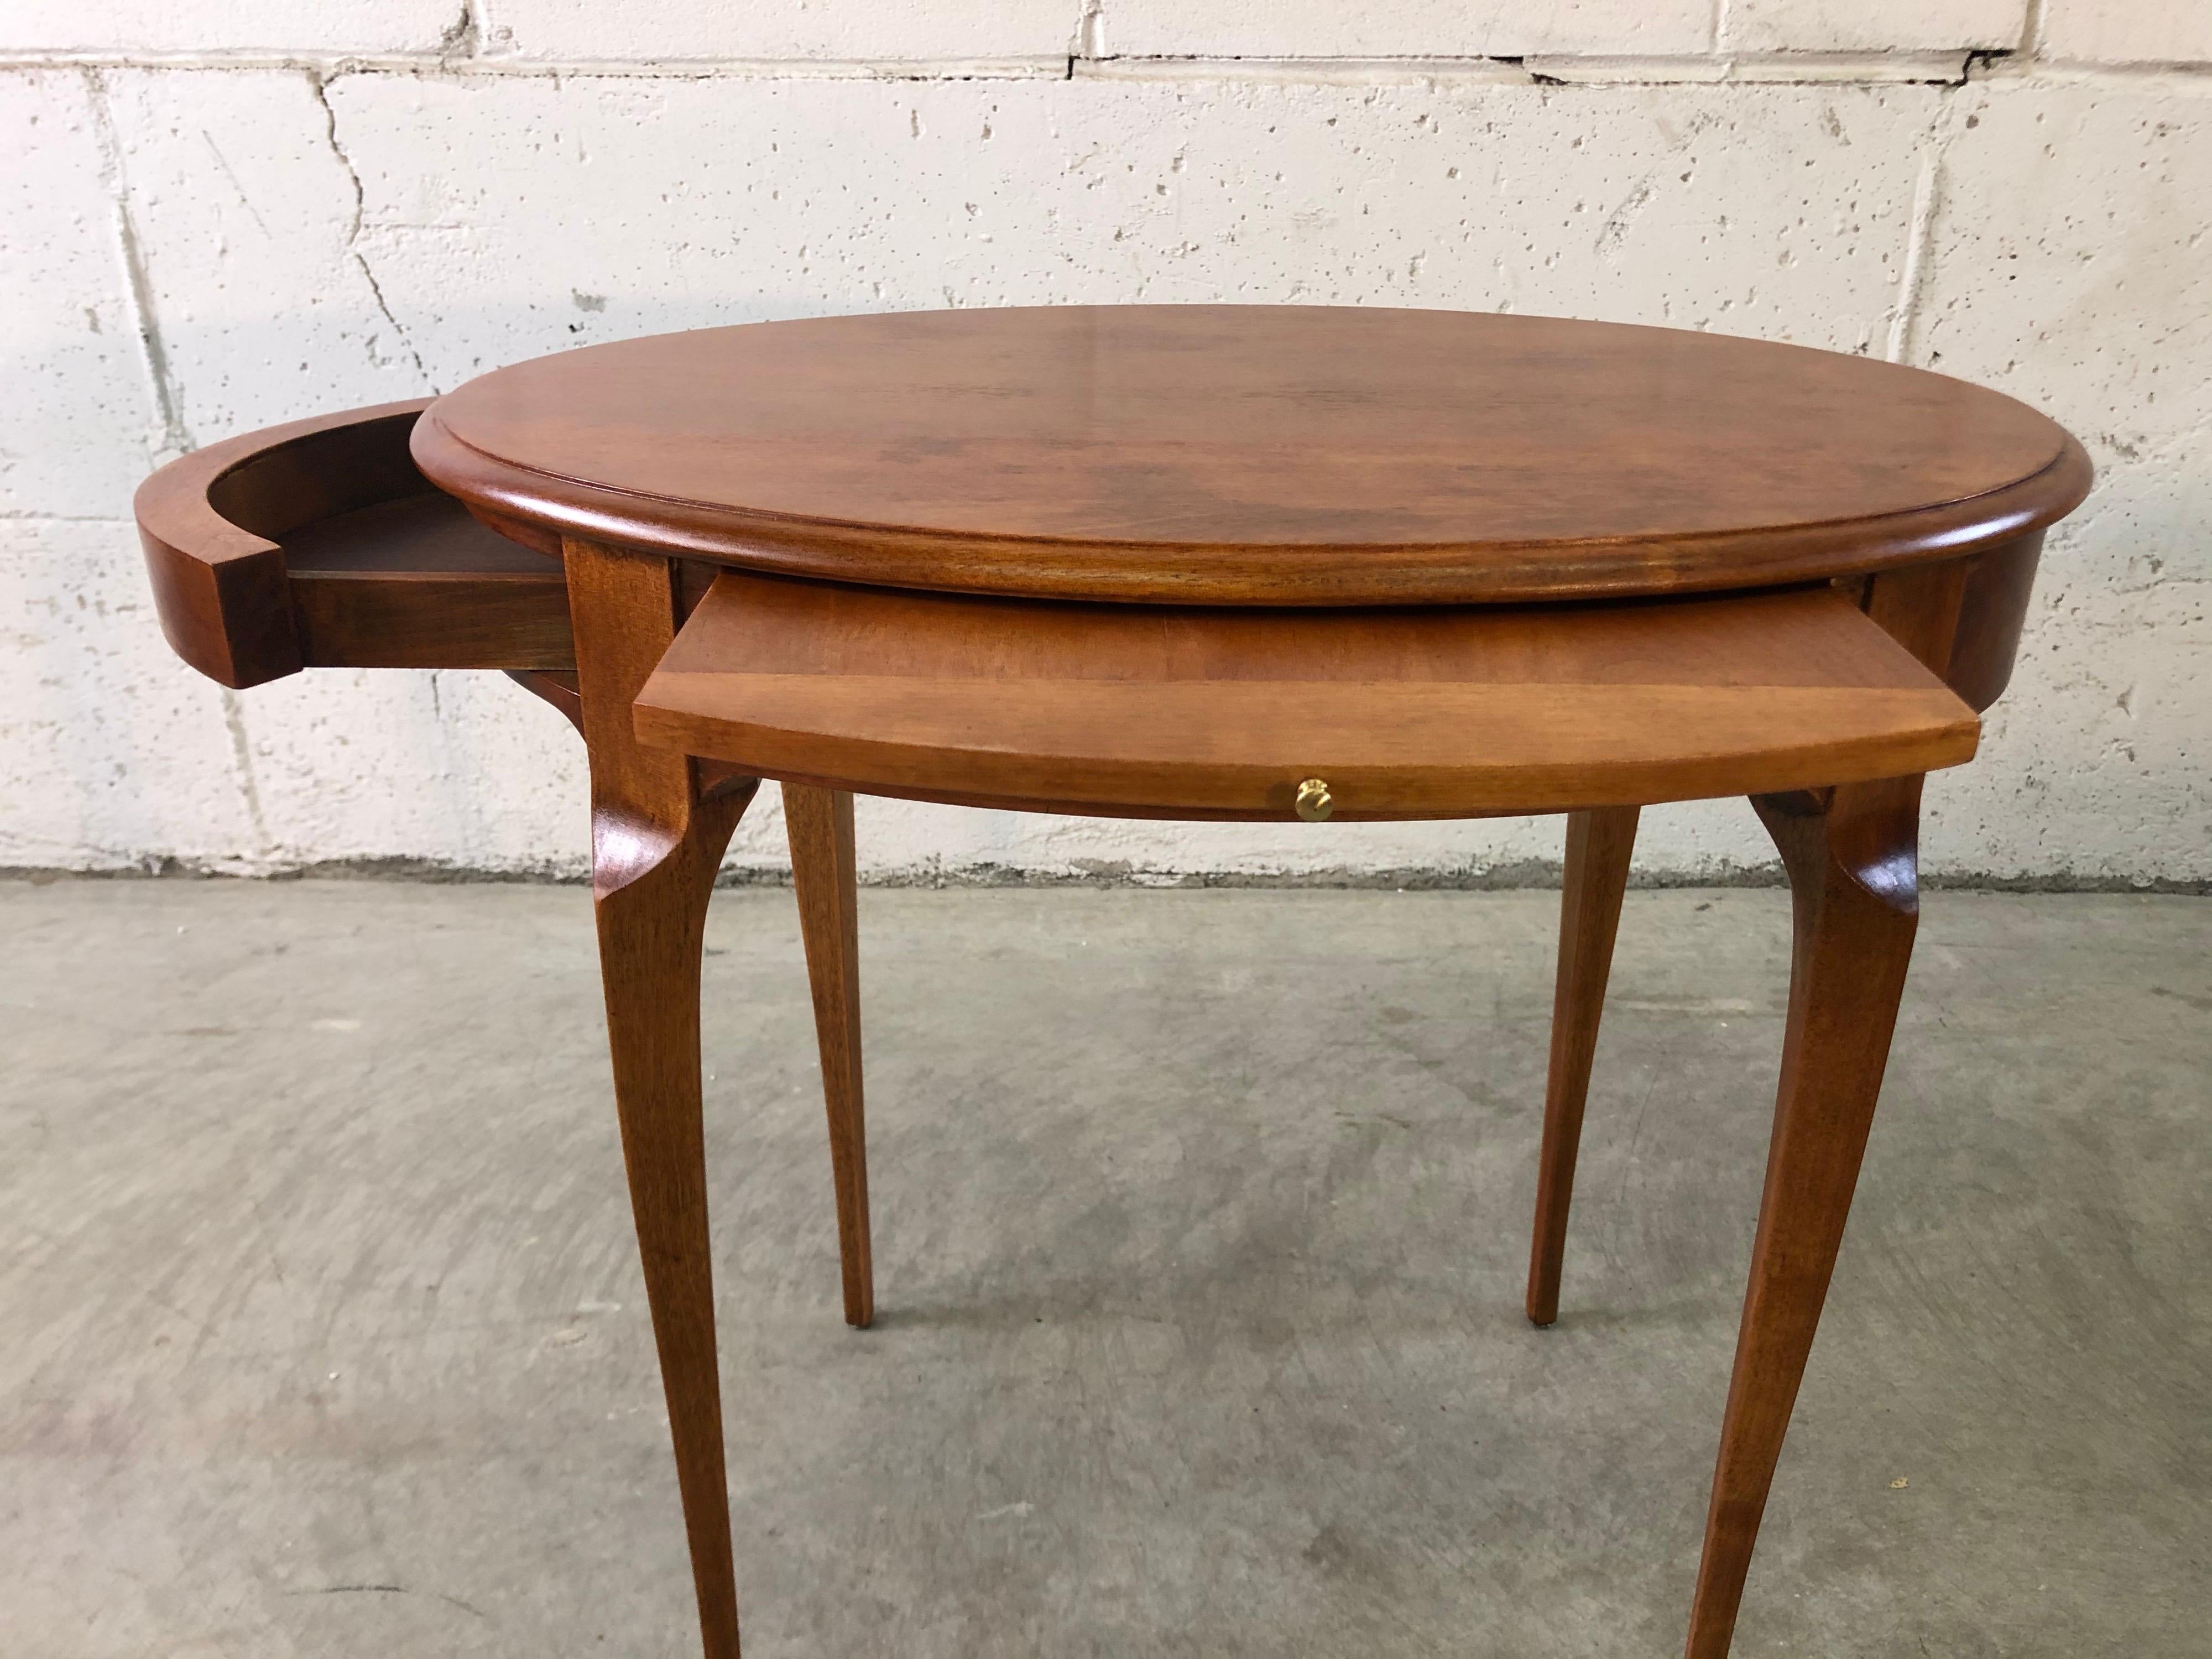 Vintage Oval Maple Wood Side Table In Good Condition For Sale In Amherst, NH